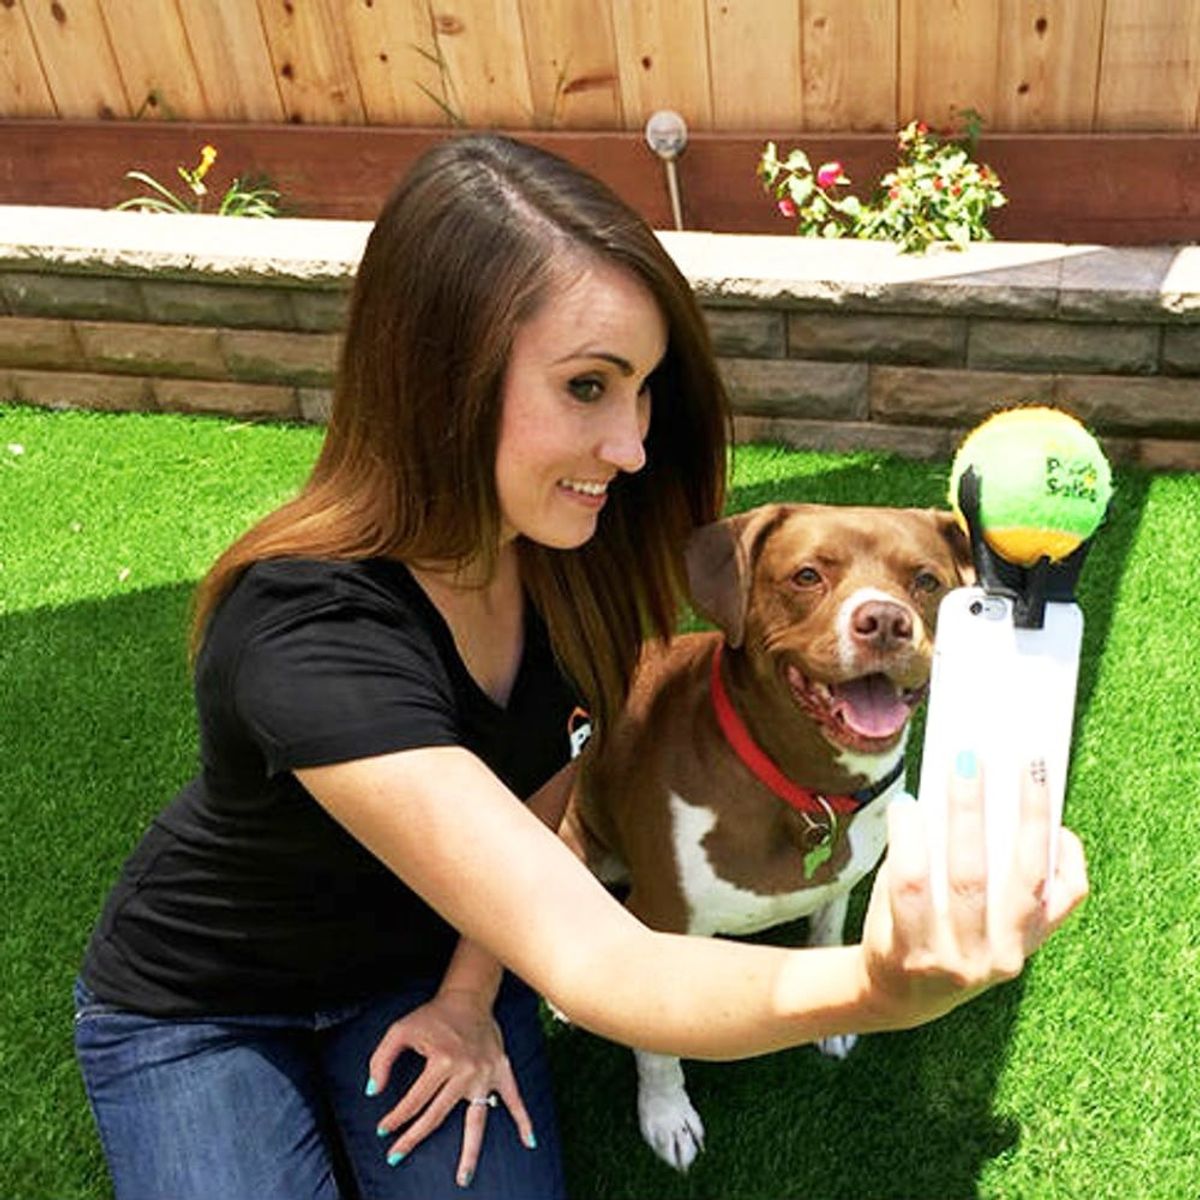 This Gadget Helps You Take Perfect Selfies With Your Dog